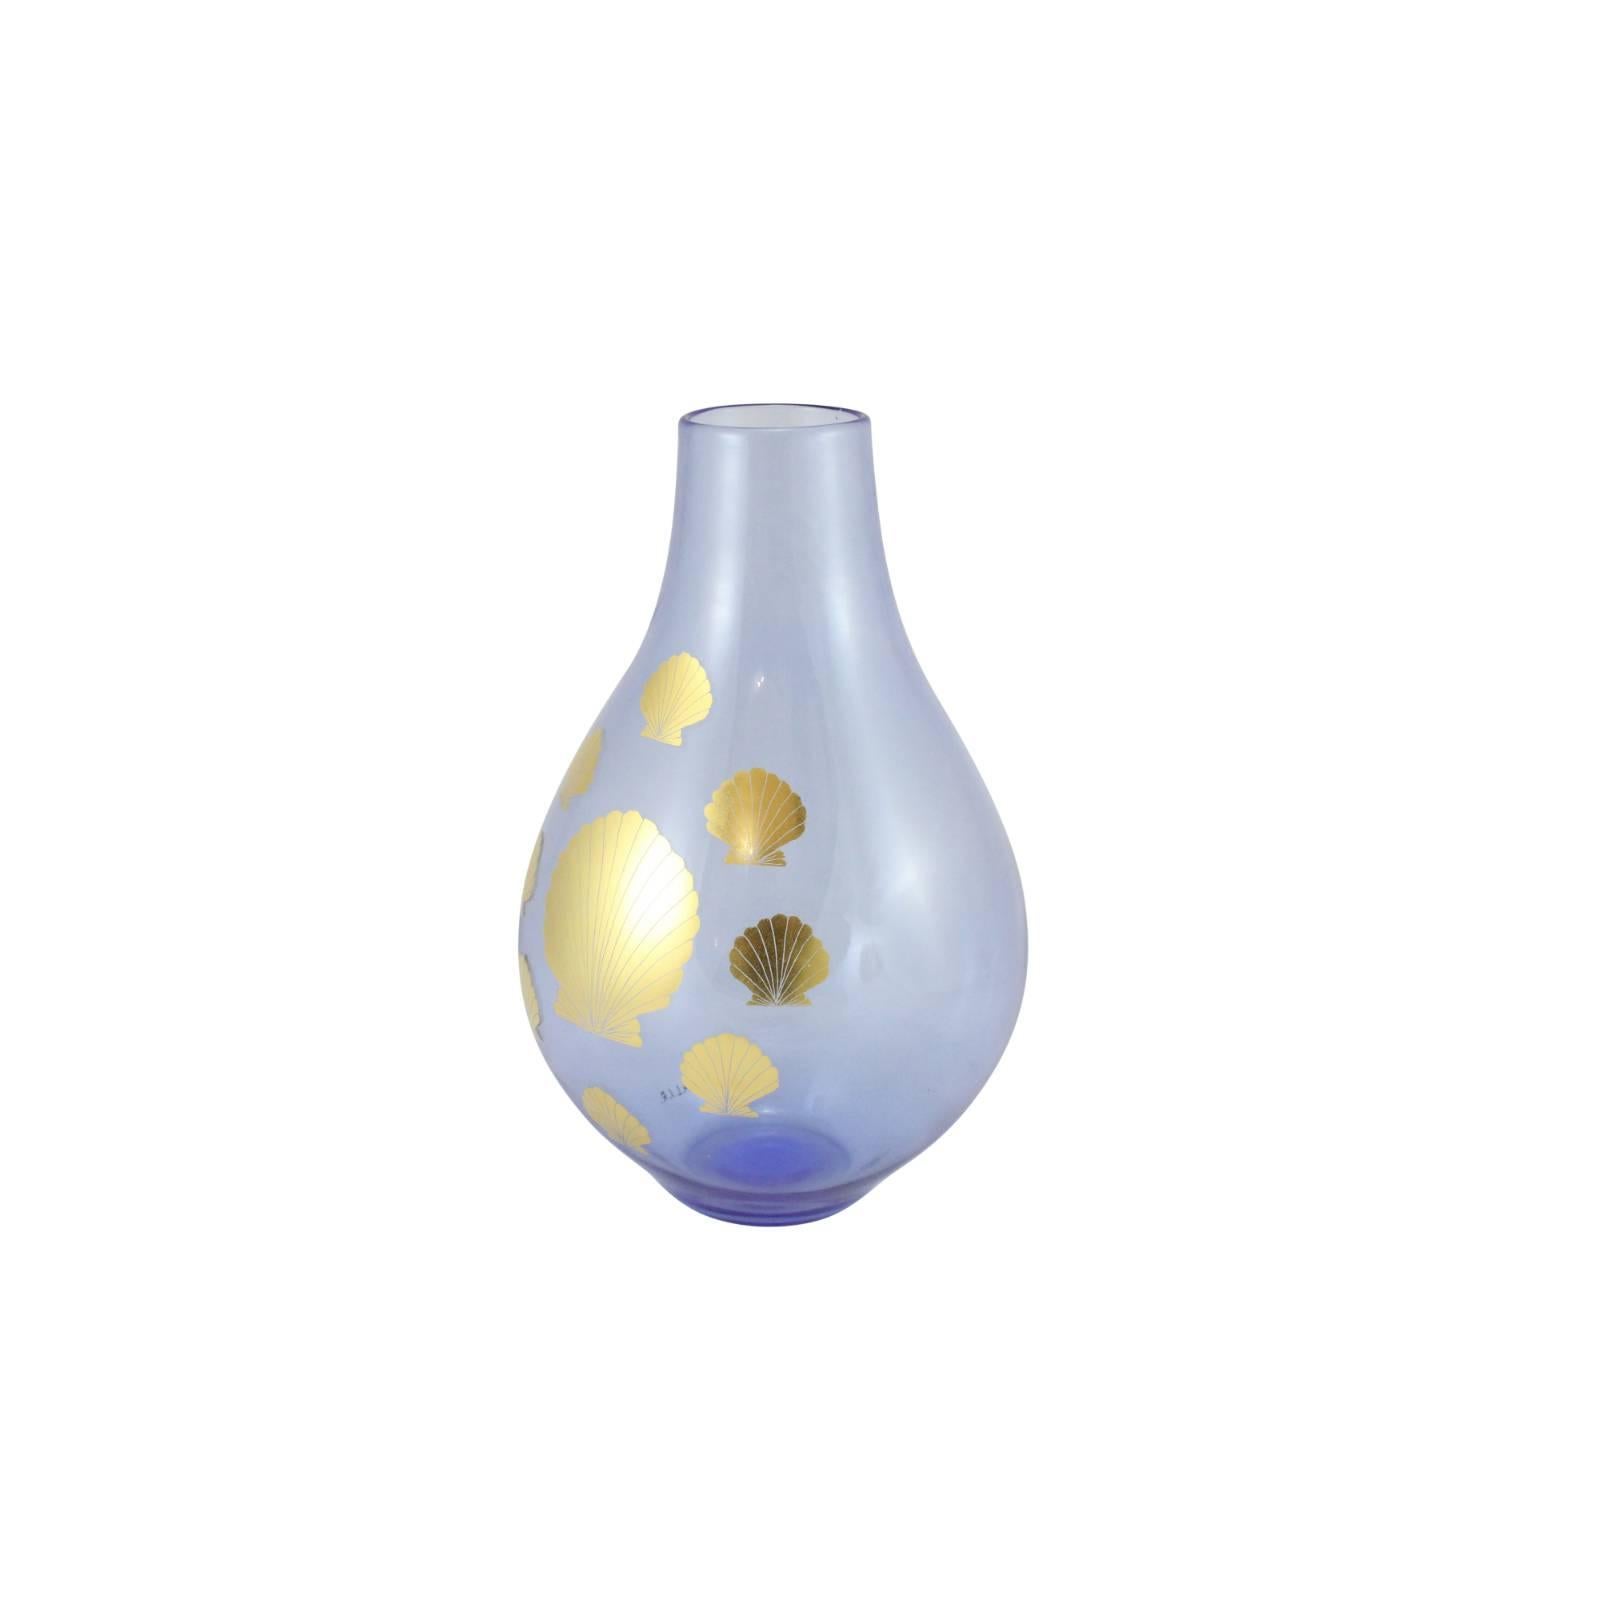 This fascinating piece is a rare and early glass vase by Piero Fornasetti, titled 'Vaso Della Shell' or Vase of Shells through collaboration with the Italian 'SALIR' - Studio Ars Labor Industrie Riunite.

An early example of Fornasetti, this